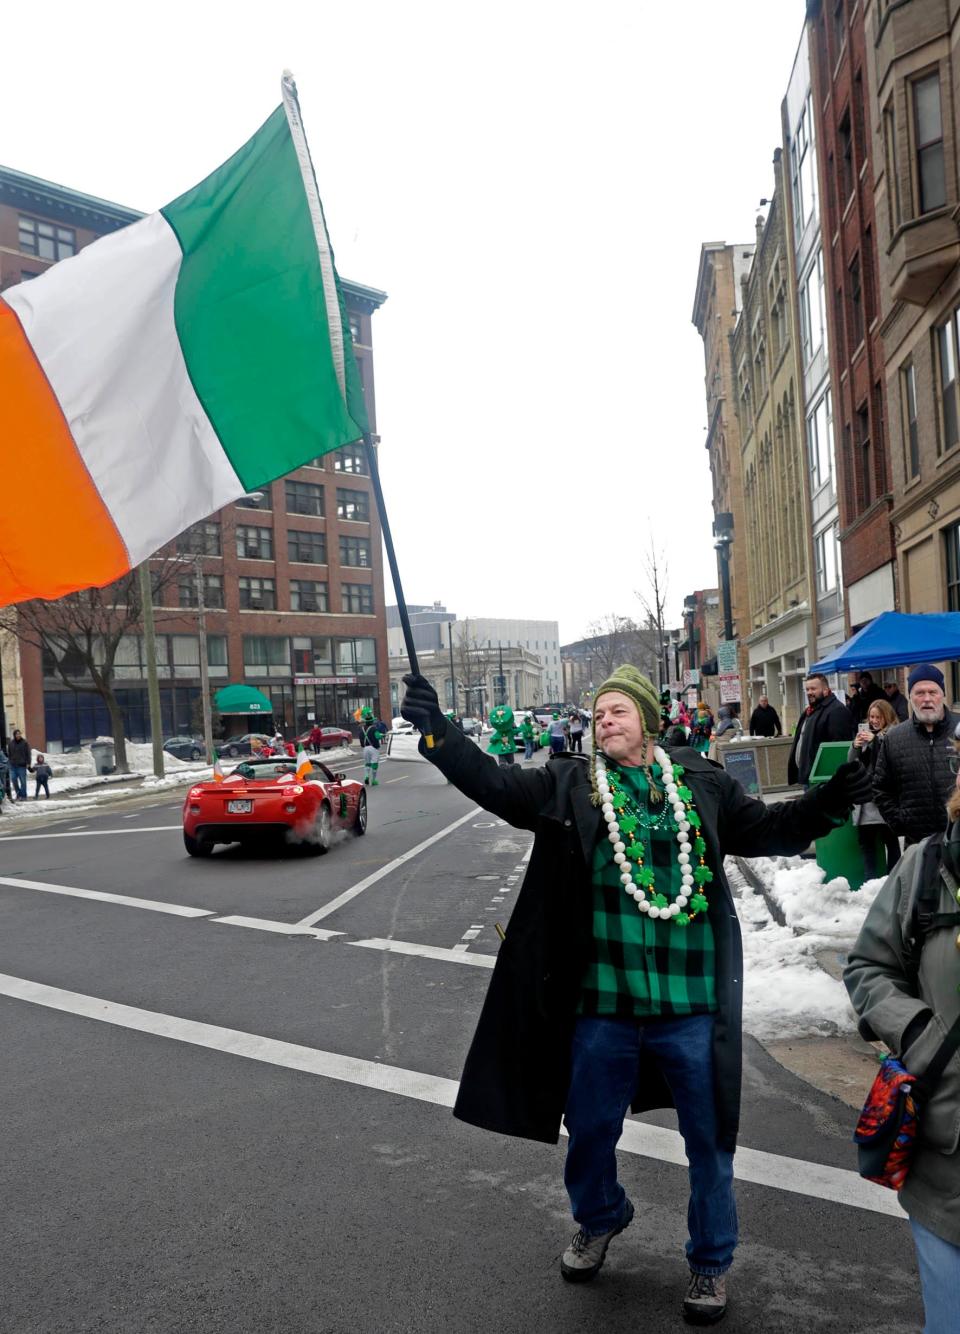 Terry King of Milwaukee dances in the street to the Irish music along Plankinton Avenue during the St. Patrick's Day parade in downtown Milwaukee in 2019. The 2020 and 2021 downtown parades were canceled because of the COVID-19 pandemic.